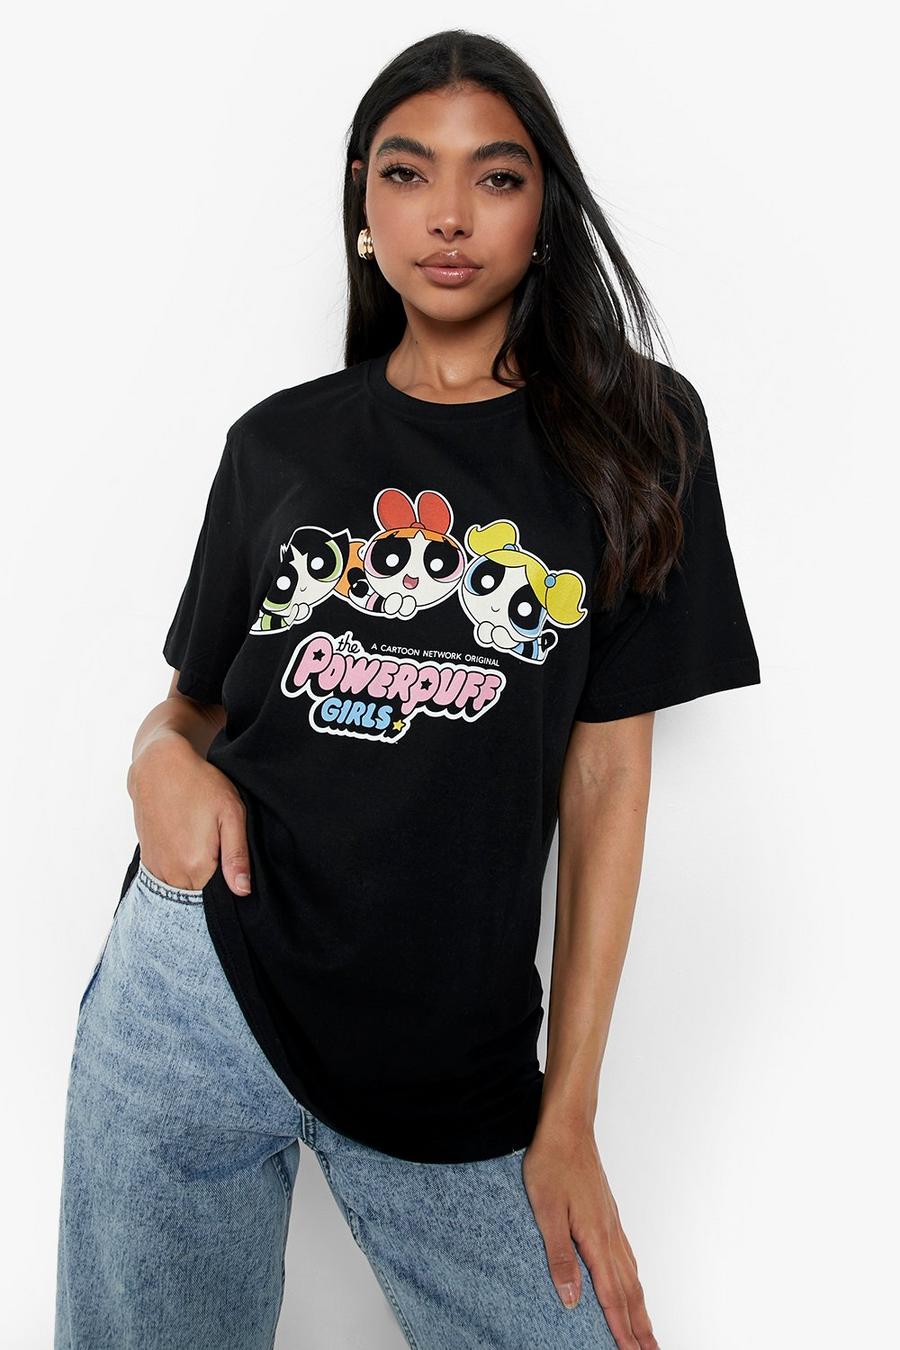 Black Tall Power Puff Girls Licensed T-shirt image number 1